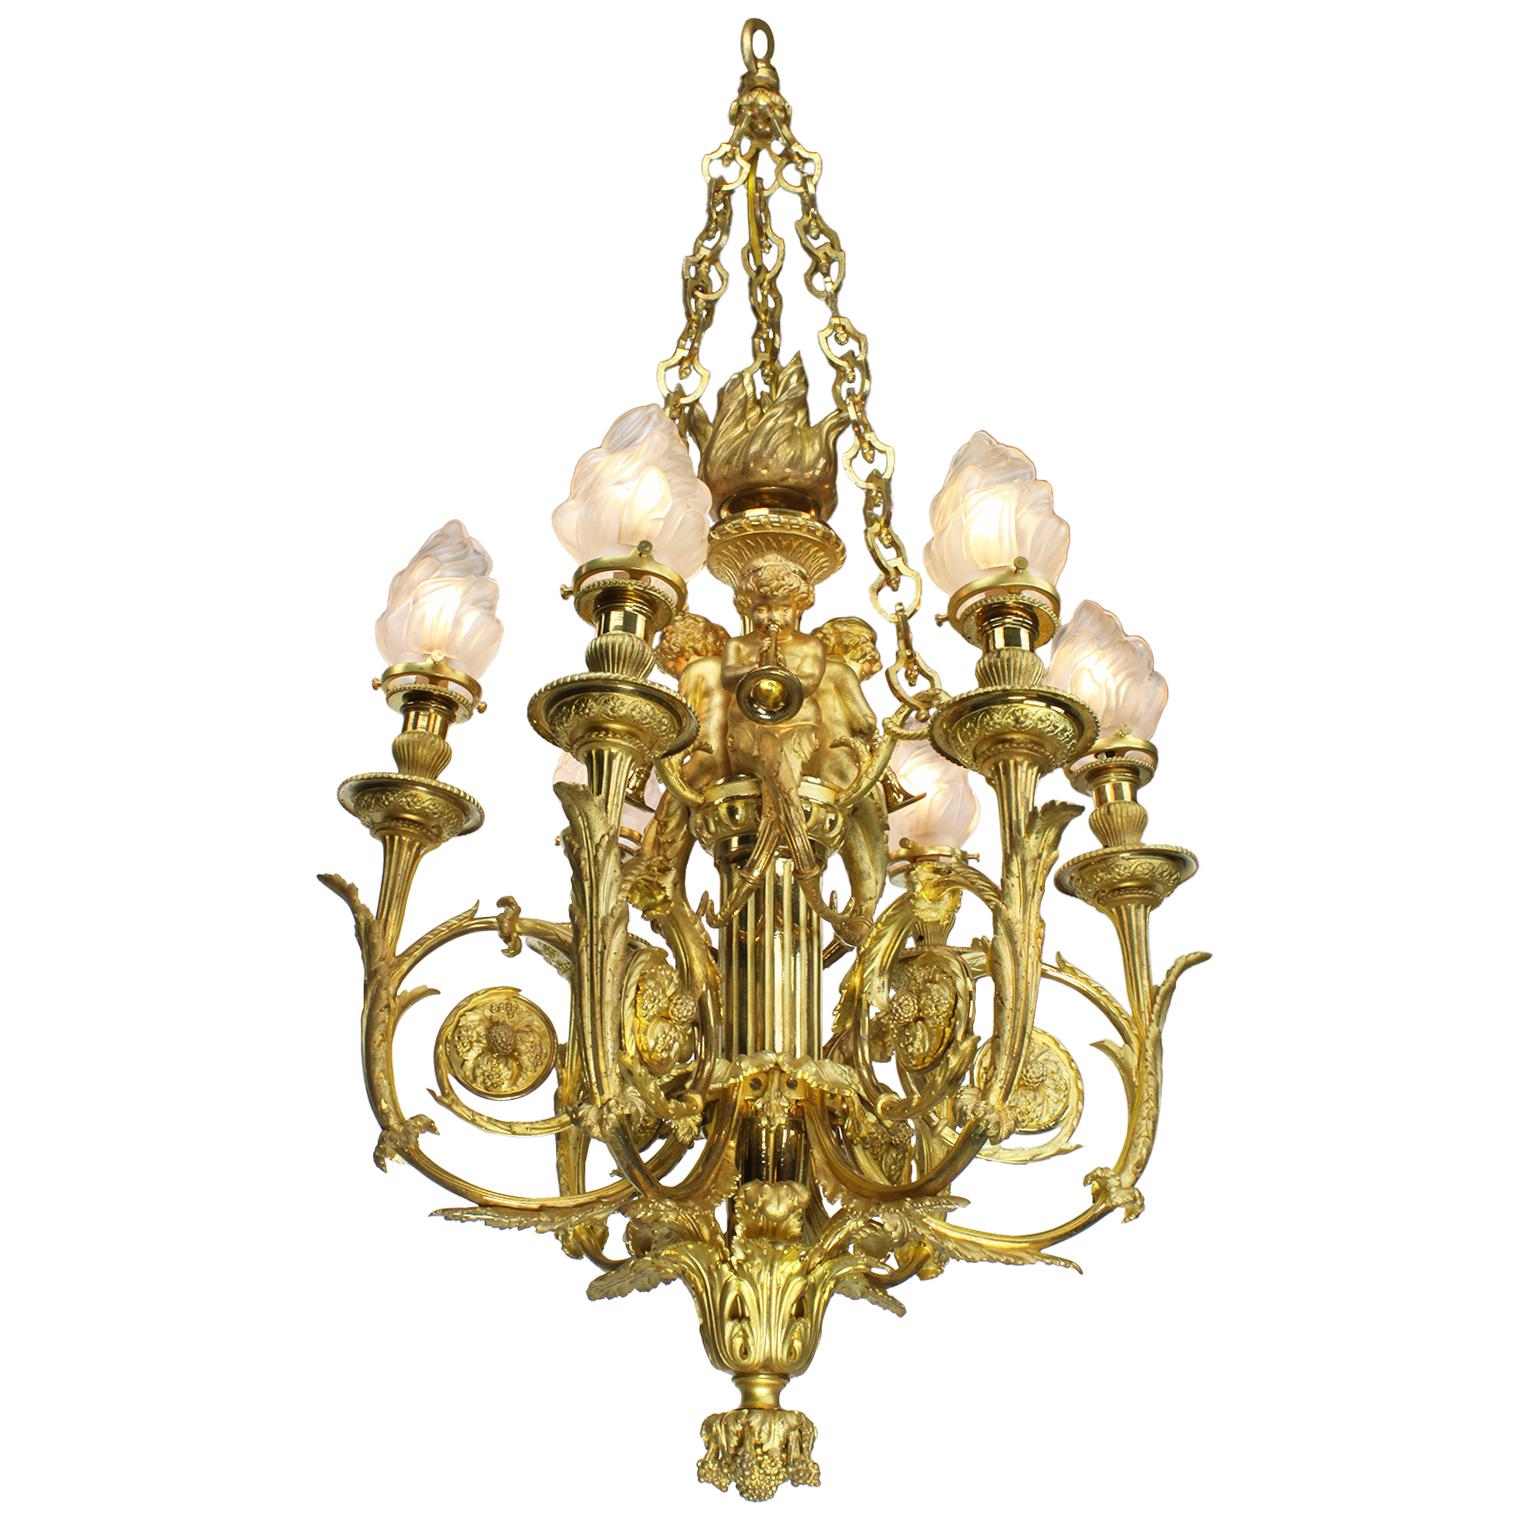 A superb quality French, 19th century Louis XVI style ormolu figural six-light whimsical chandelier with figures of cherubs, after the model by Pierre Gouthiere in the cabinet dore´ for Marie-Antoinette at the royal palace of Versailles. The finely